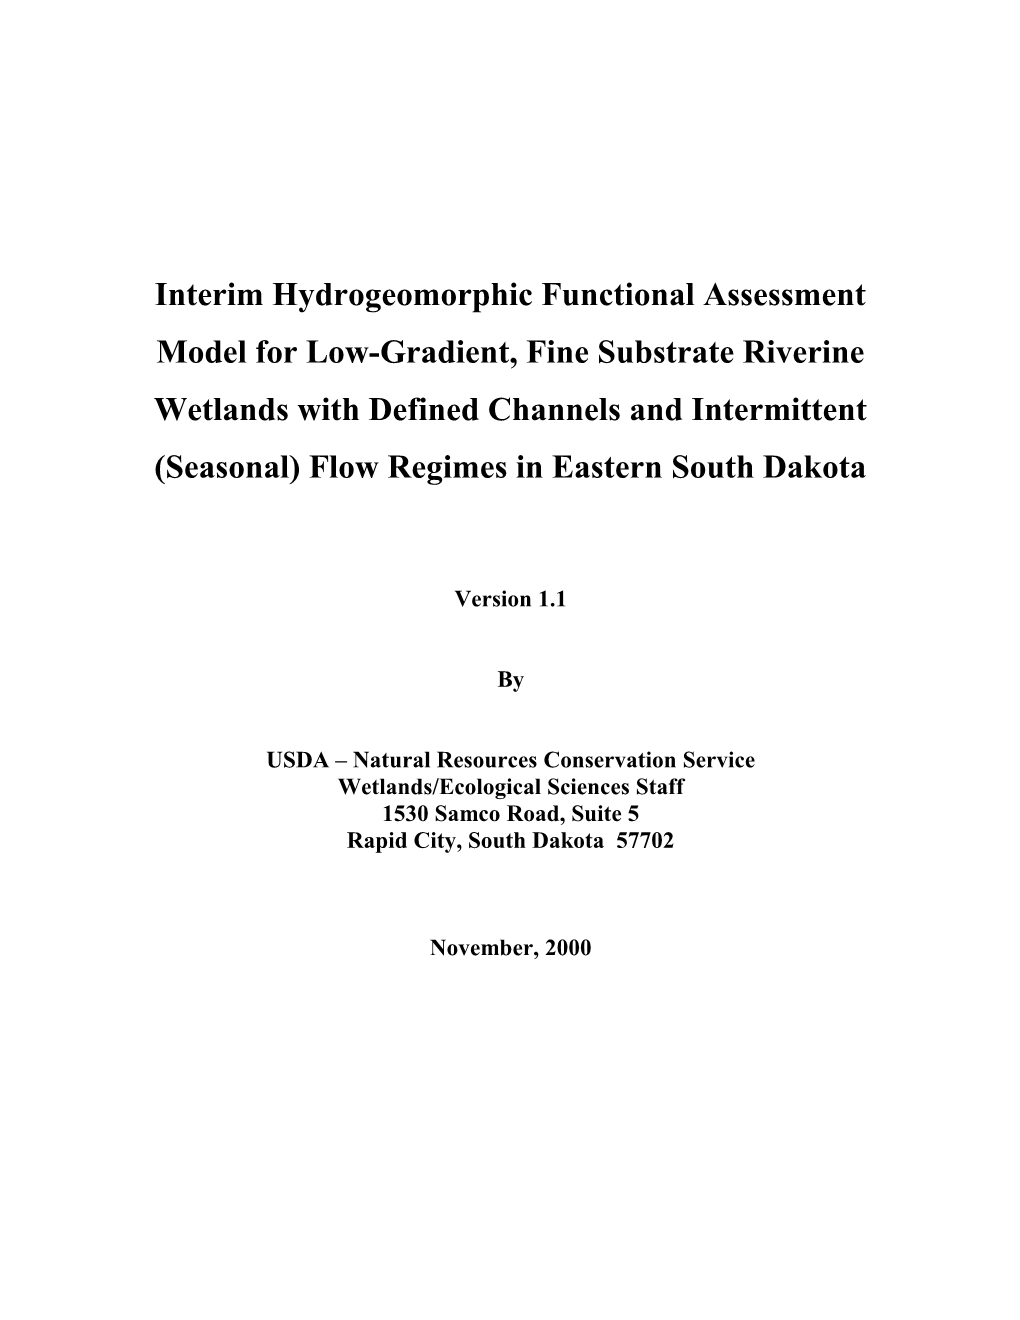 Interim Hydrogeomorphic Functional Assessment Model for Low-Gradient, Fine Substrate Riverine